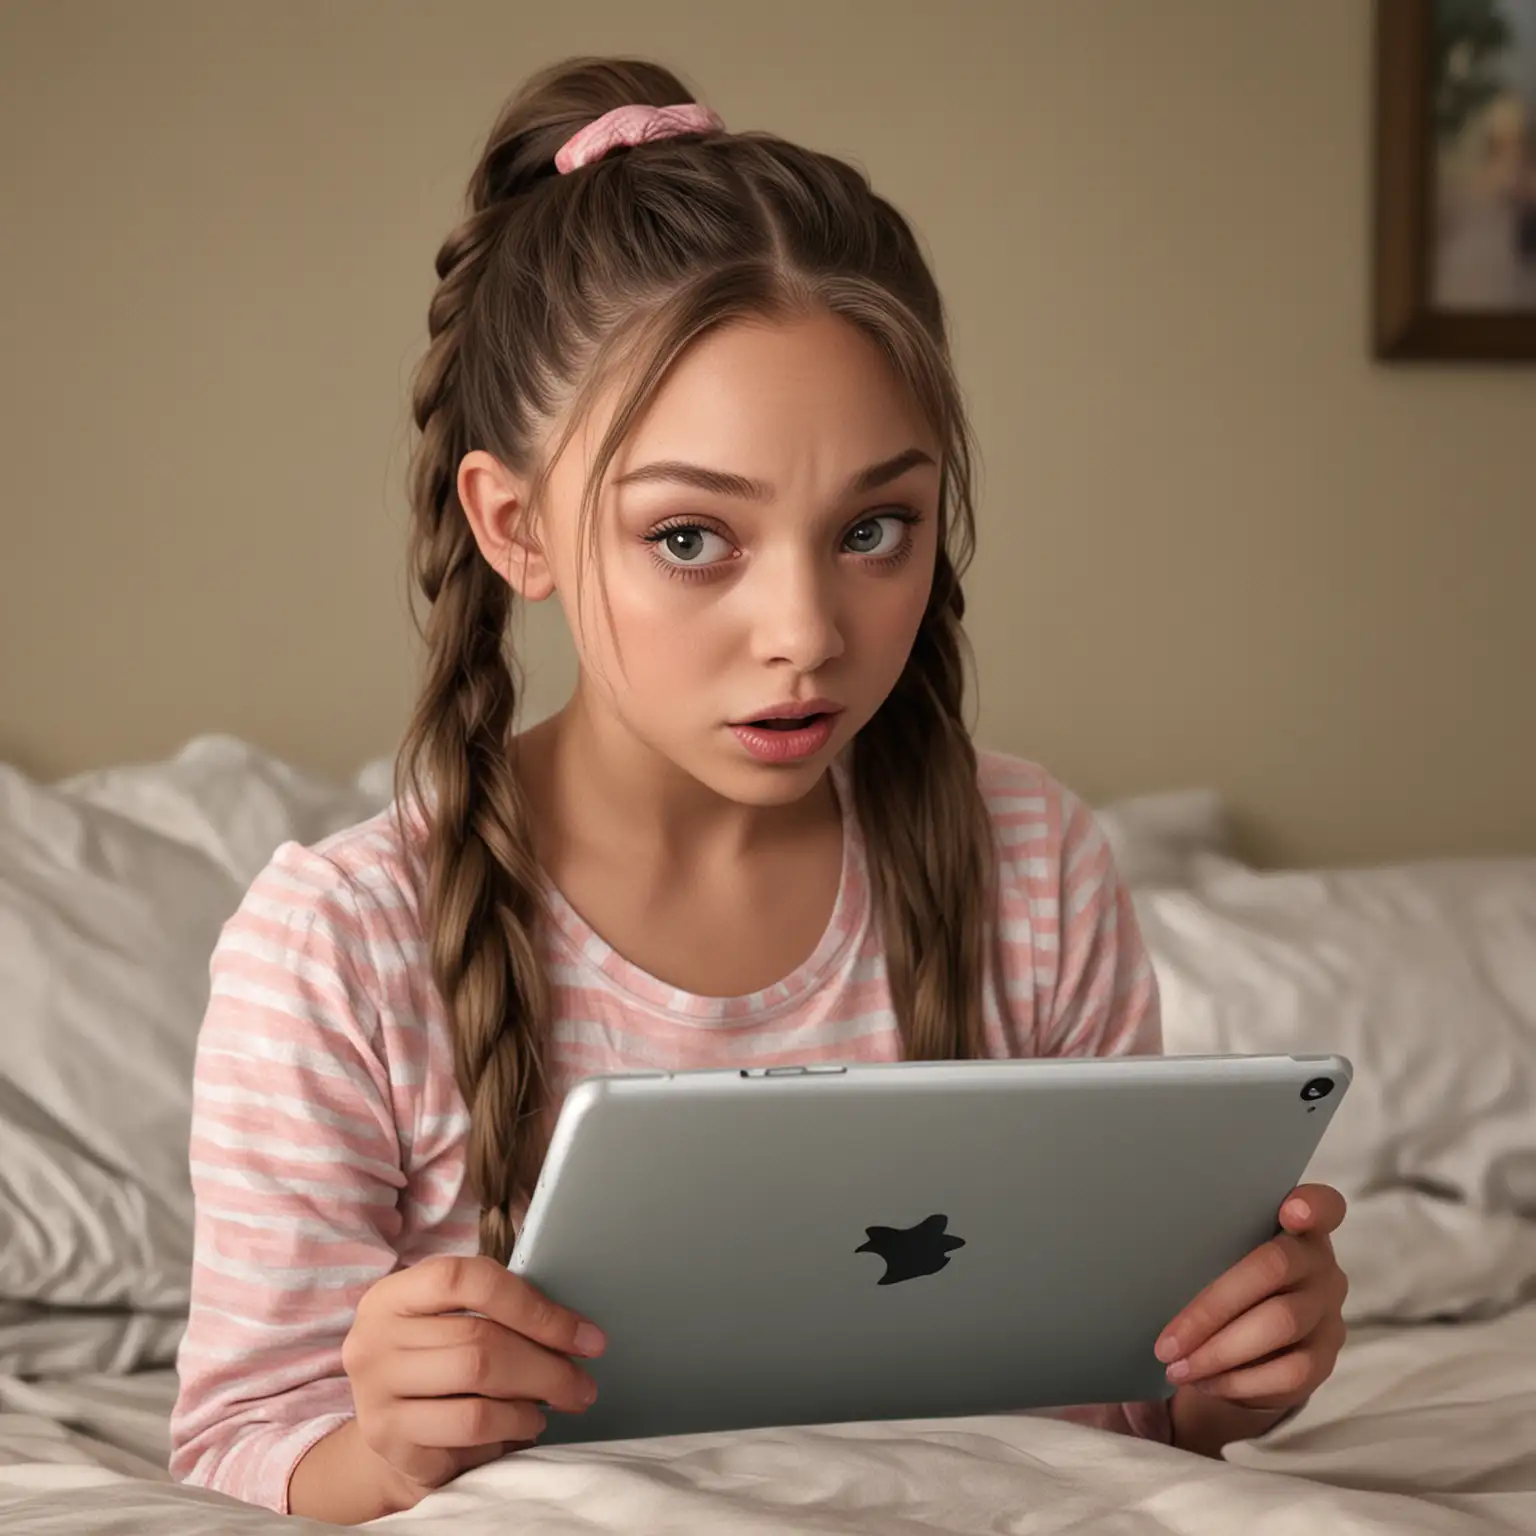 Young Girl with Pigtails Watching Shocking Video on iPad in Bedroom